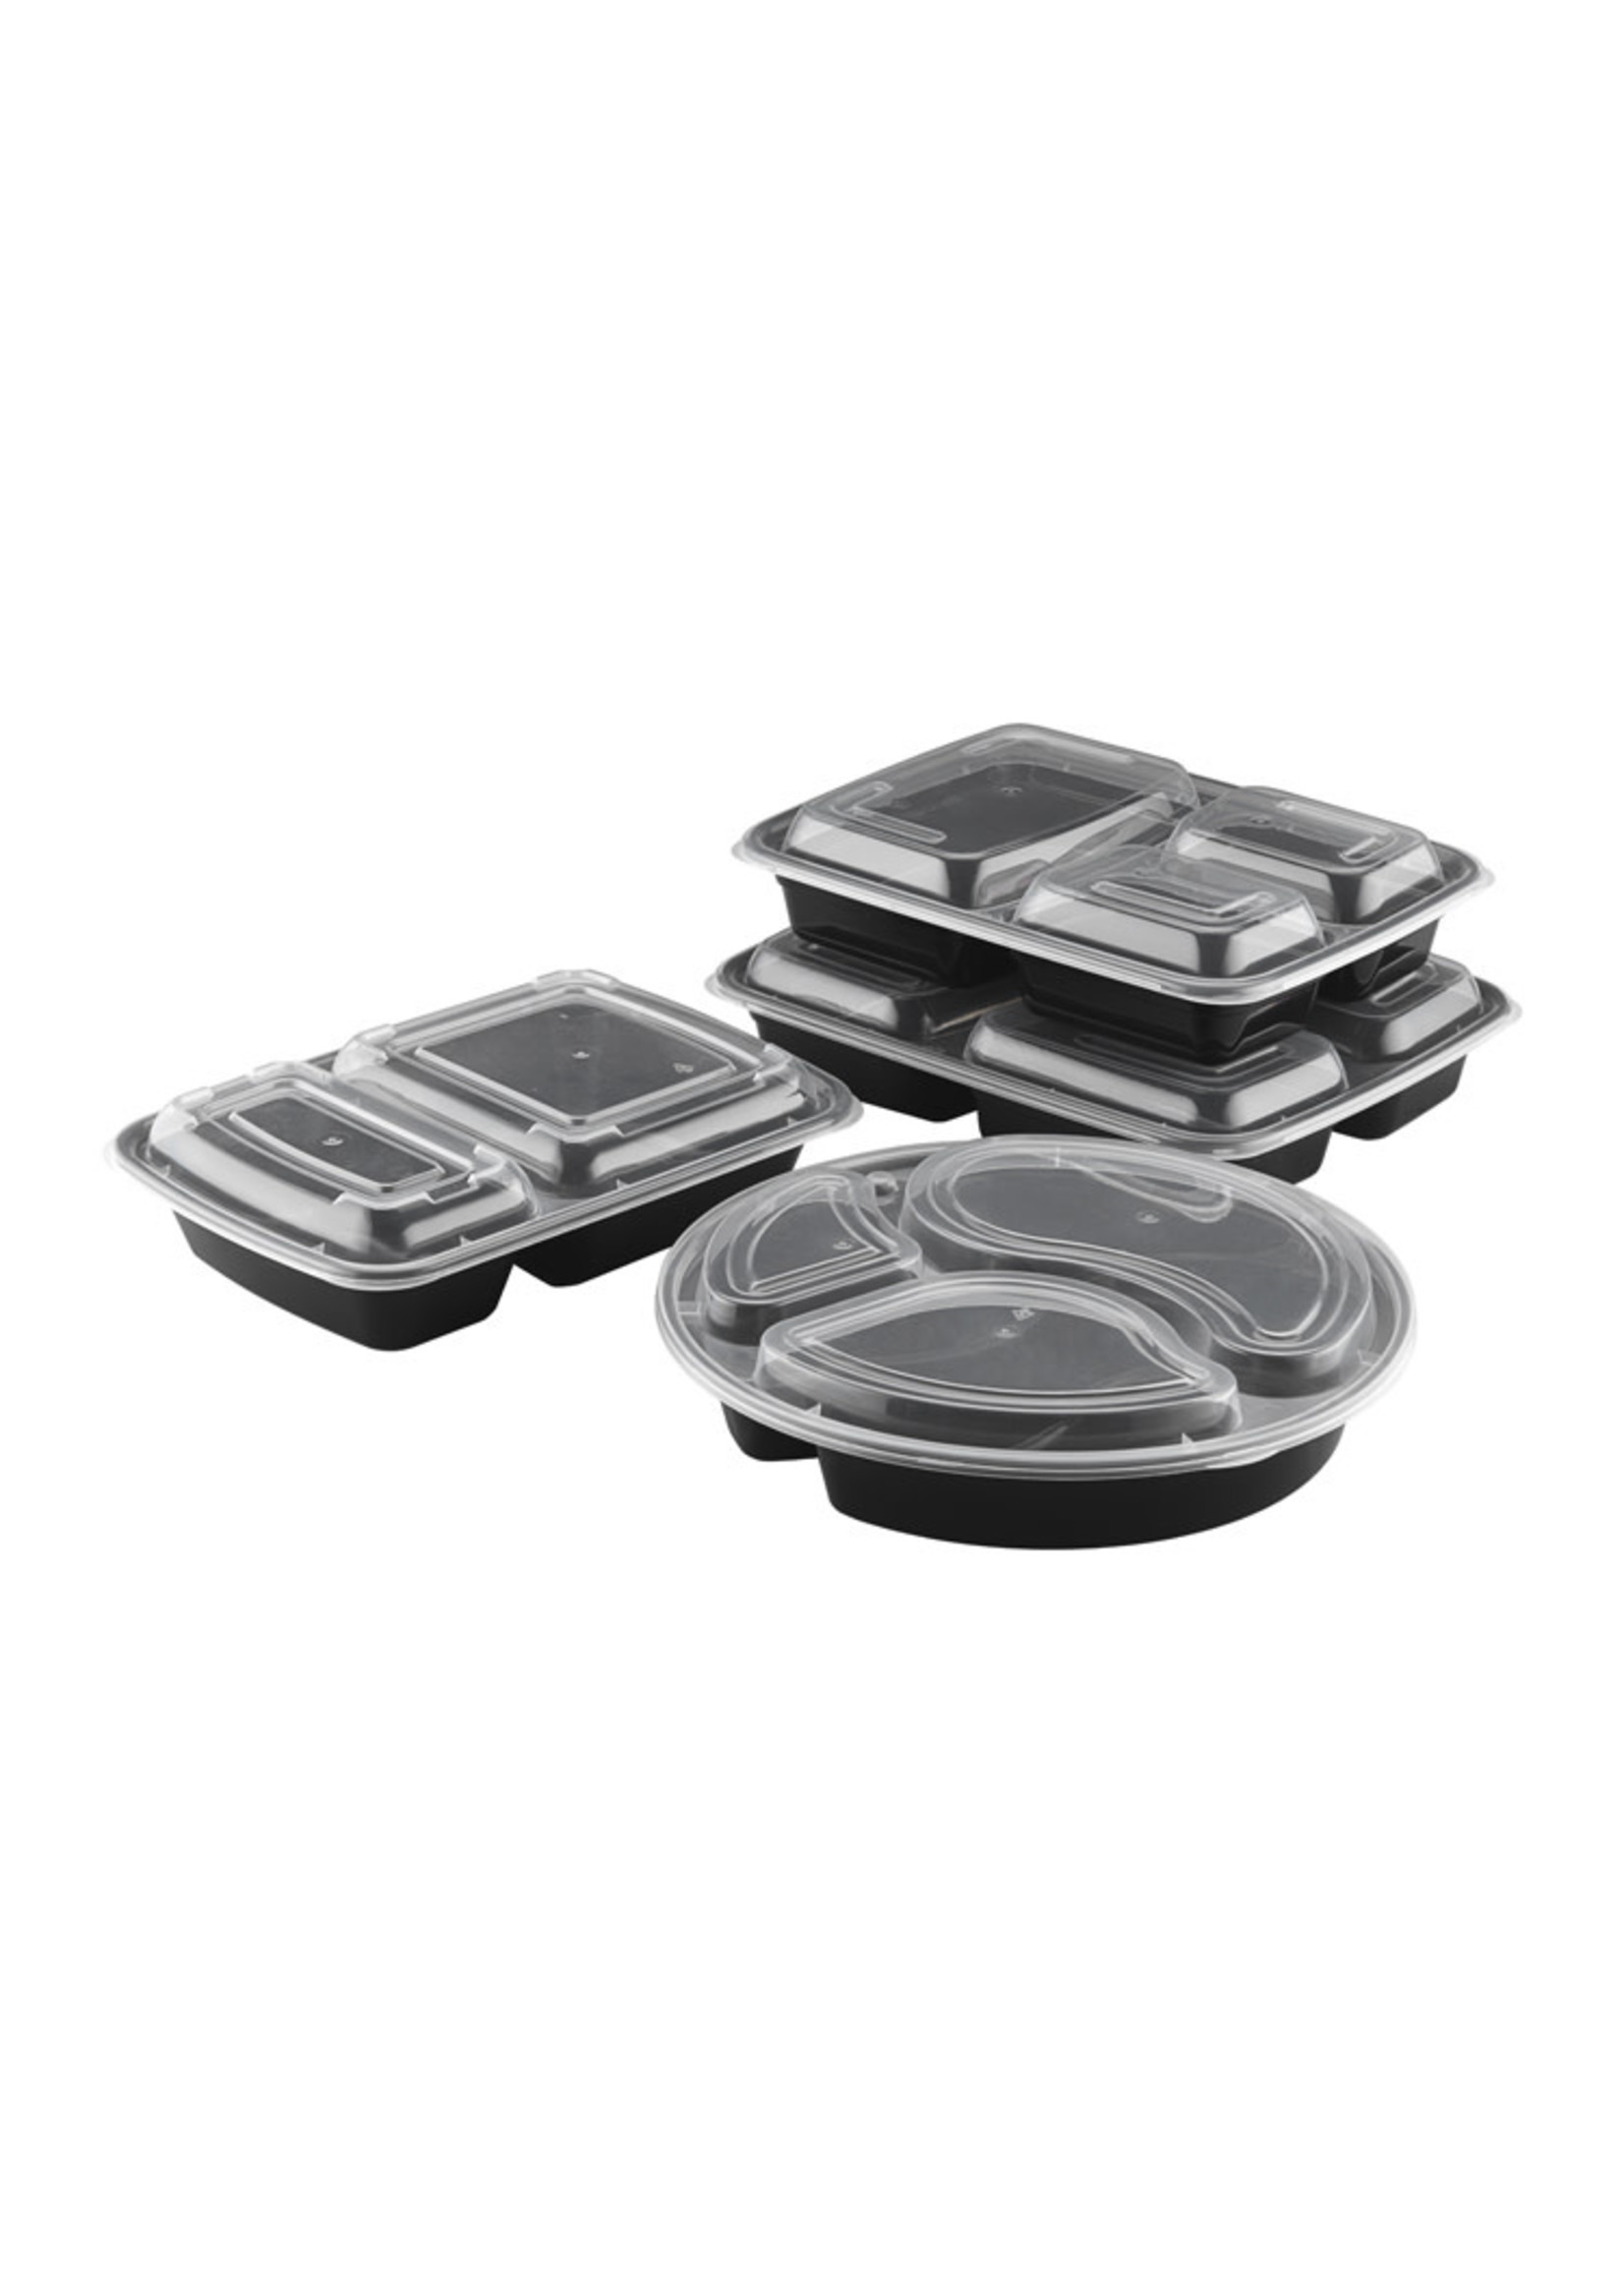 Tiya, Inc. TY-348 - 48oz Square Microwavable Container with Lid 3-compartment, 100 sets